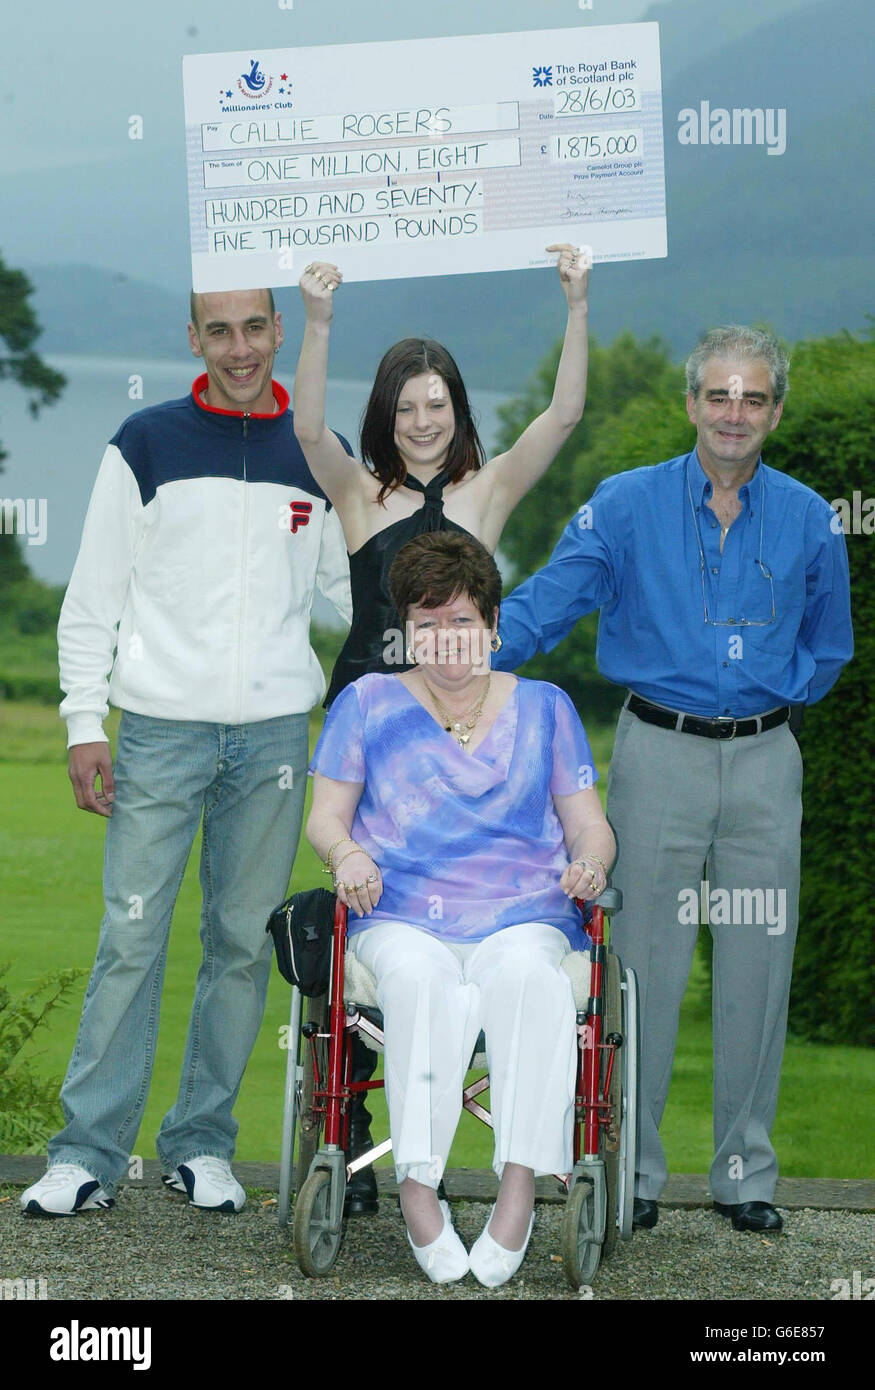 Sixteen-year-old Callie Rogers from Cockermouth in Cumbria celebrates with boyfriend Gary Fidler (left) and foster parents Ray and Sheila Holmes after winning 1.8 million on the National Lottery, becoming the second youngest jackpot winner. Stock Photo